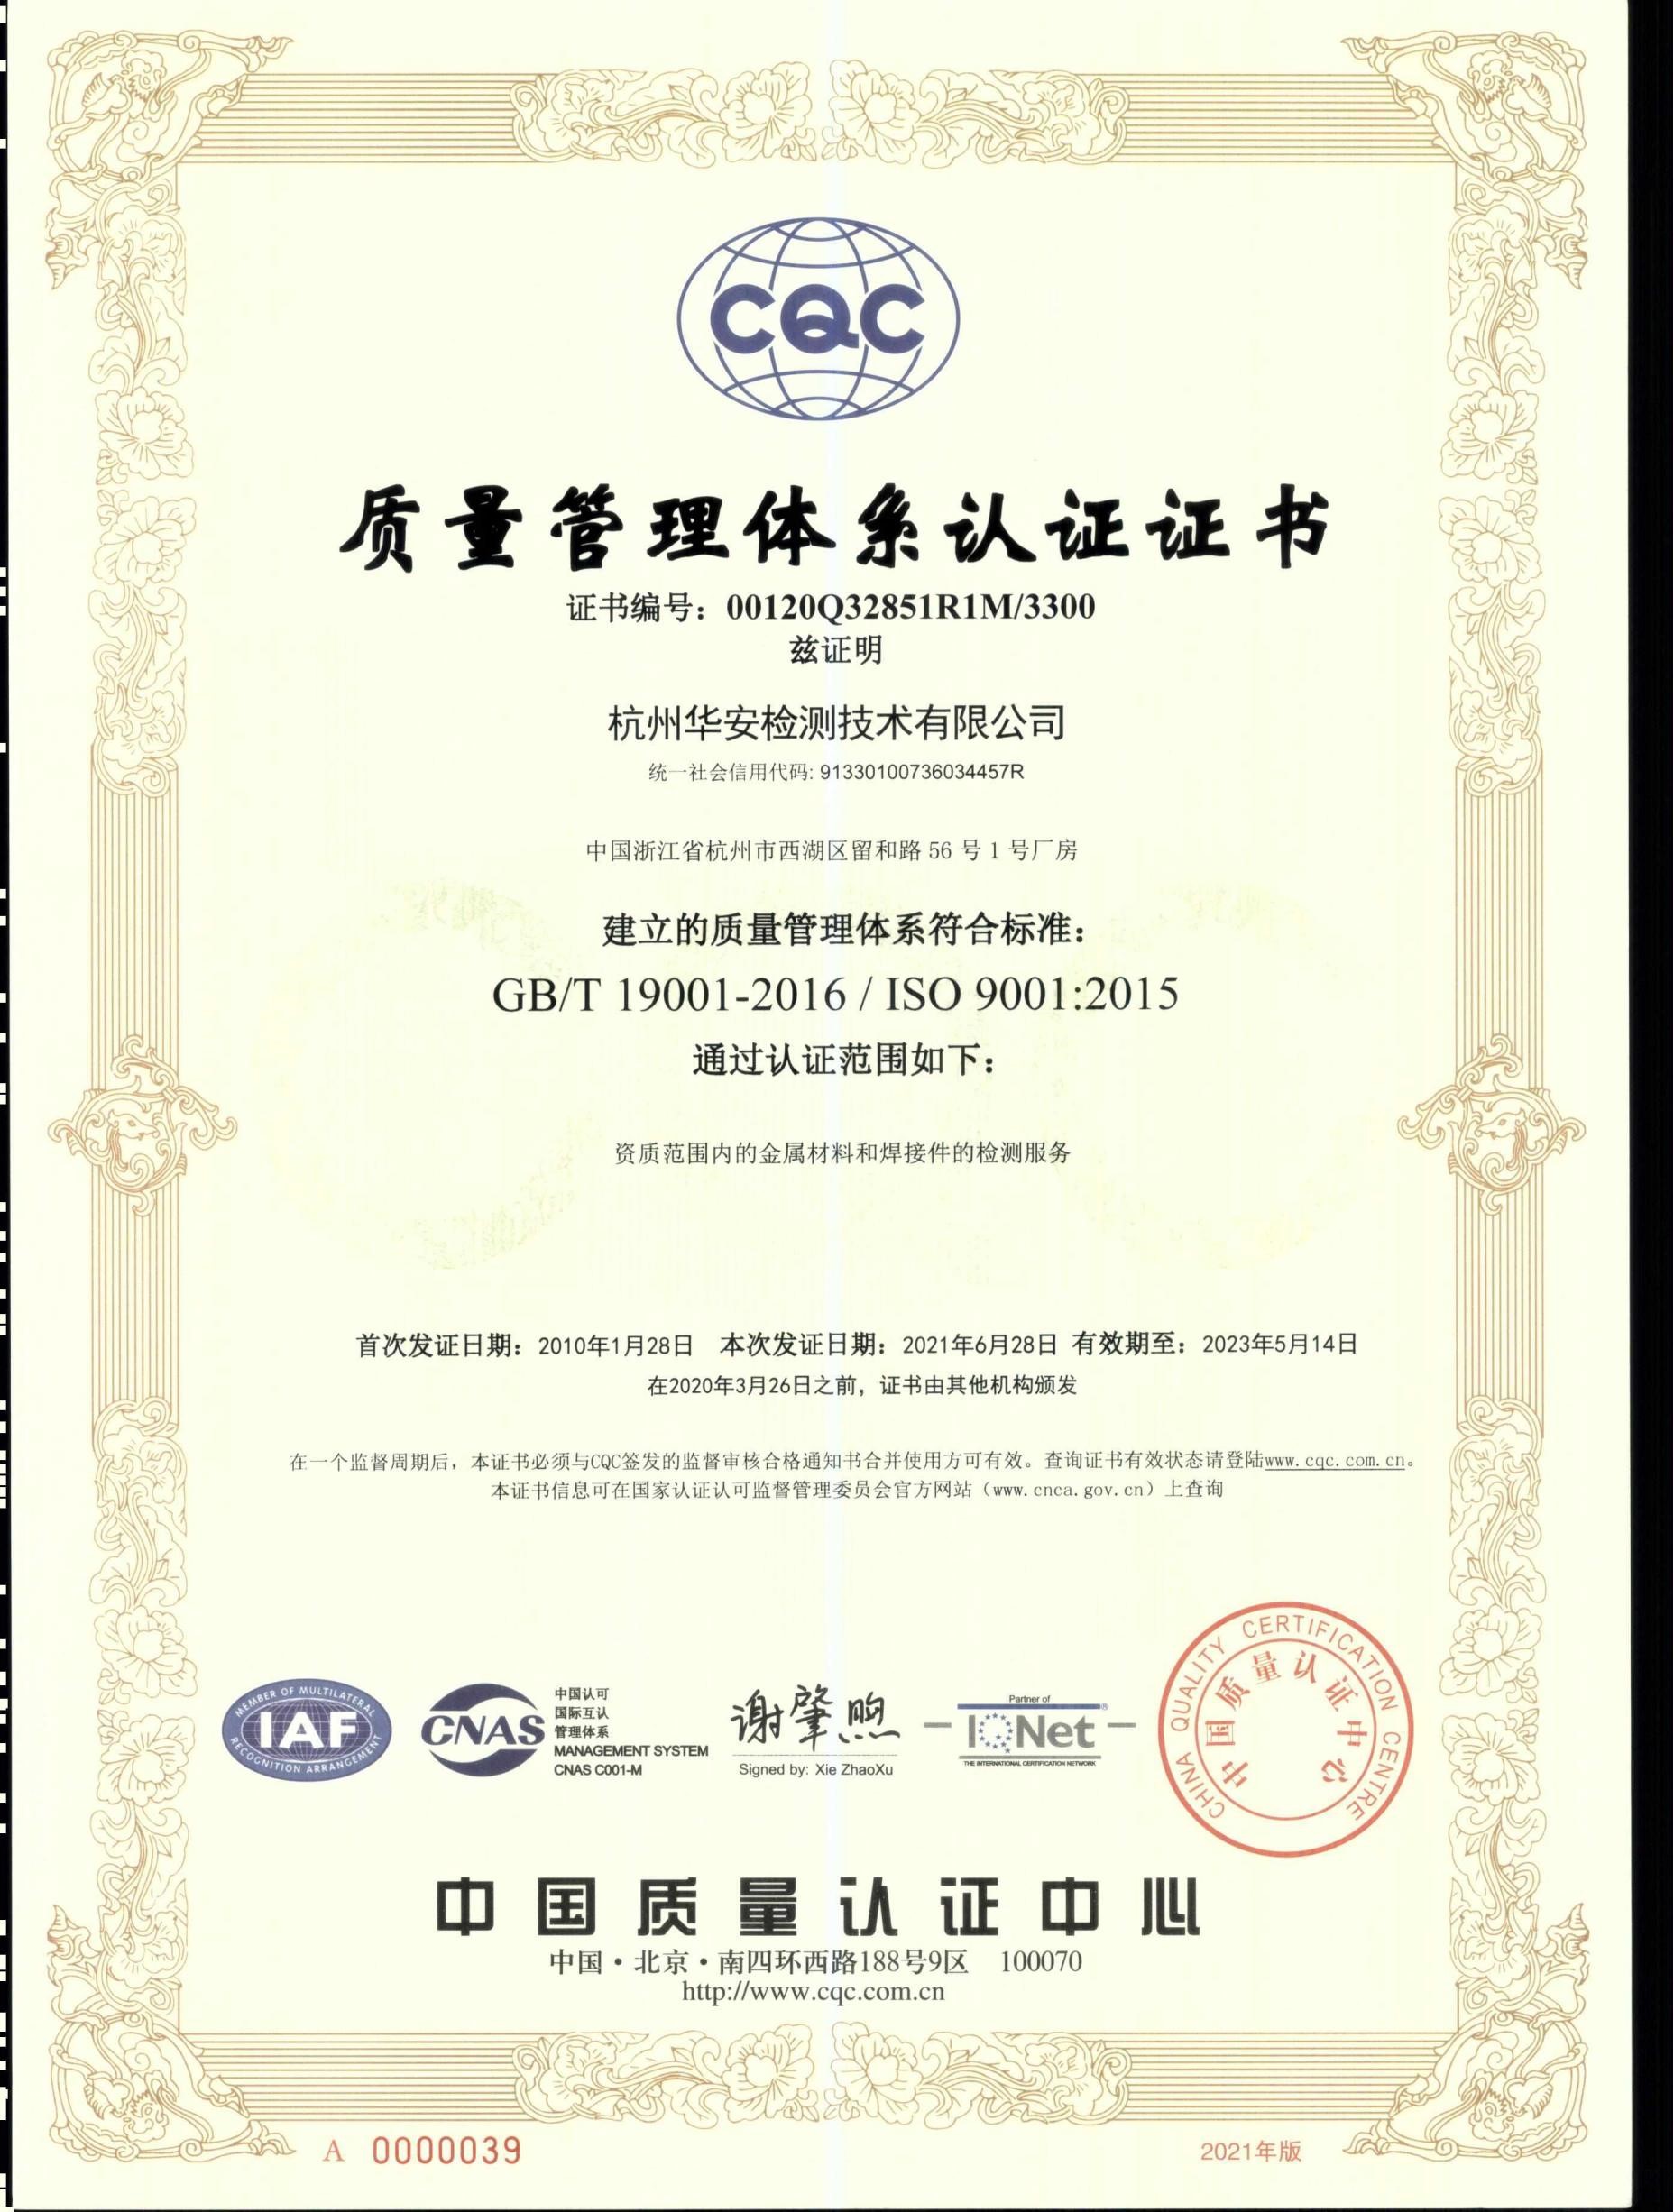 Quality management system certification ISO 9001:2015